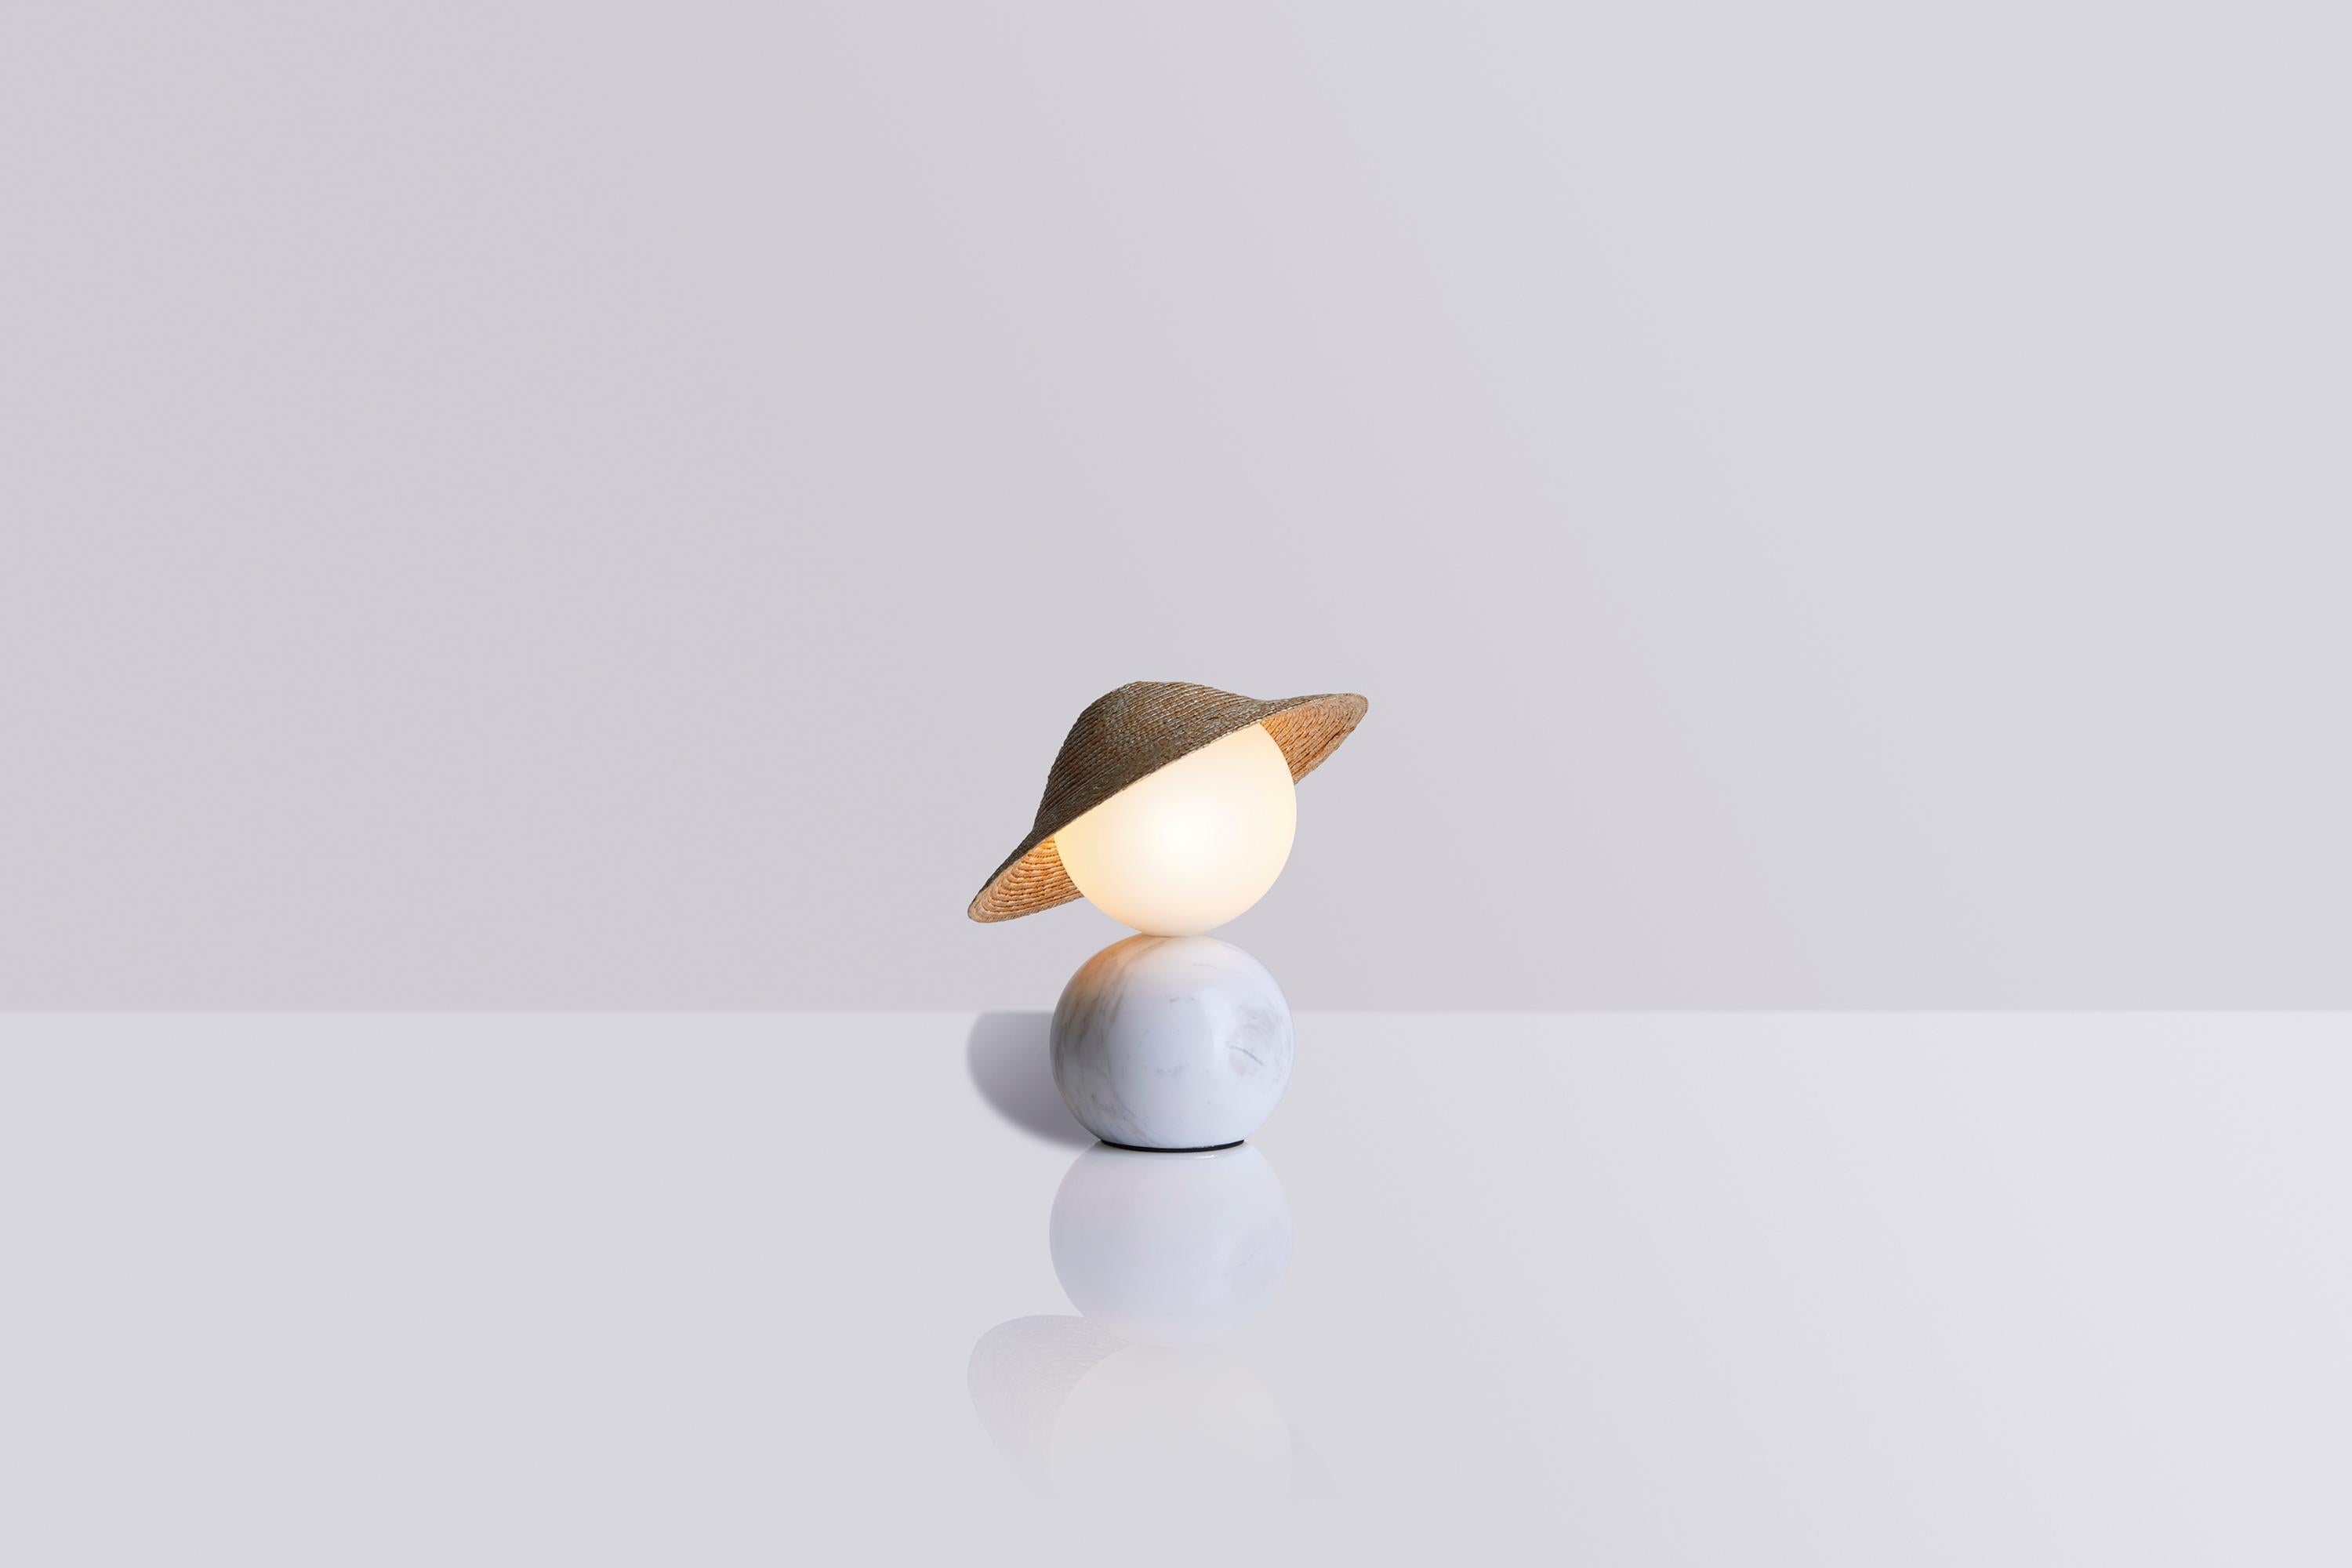 Greek Table lamp Théros 0.2 by Aristotelis Barakos, made out of white marble For Sale